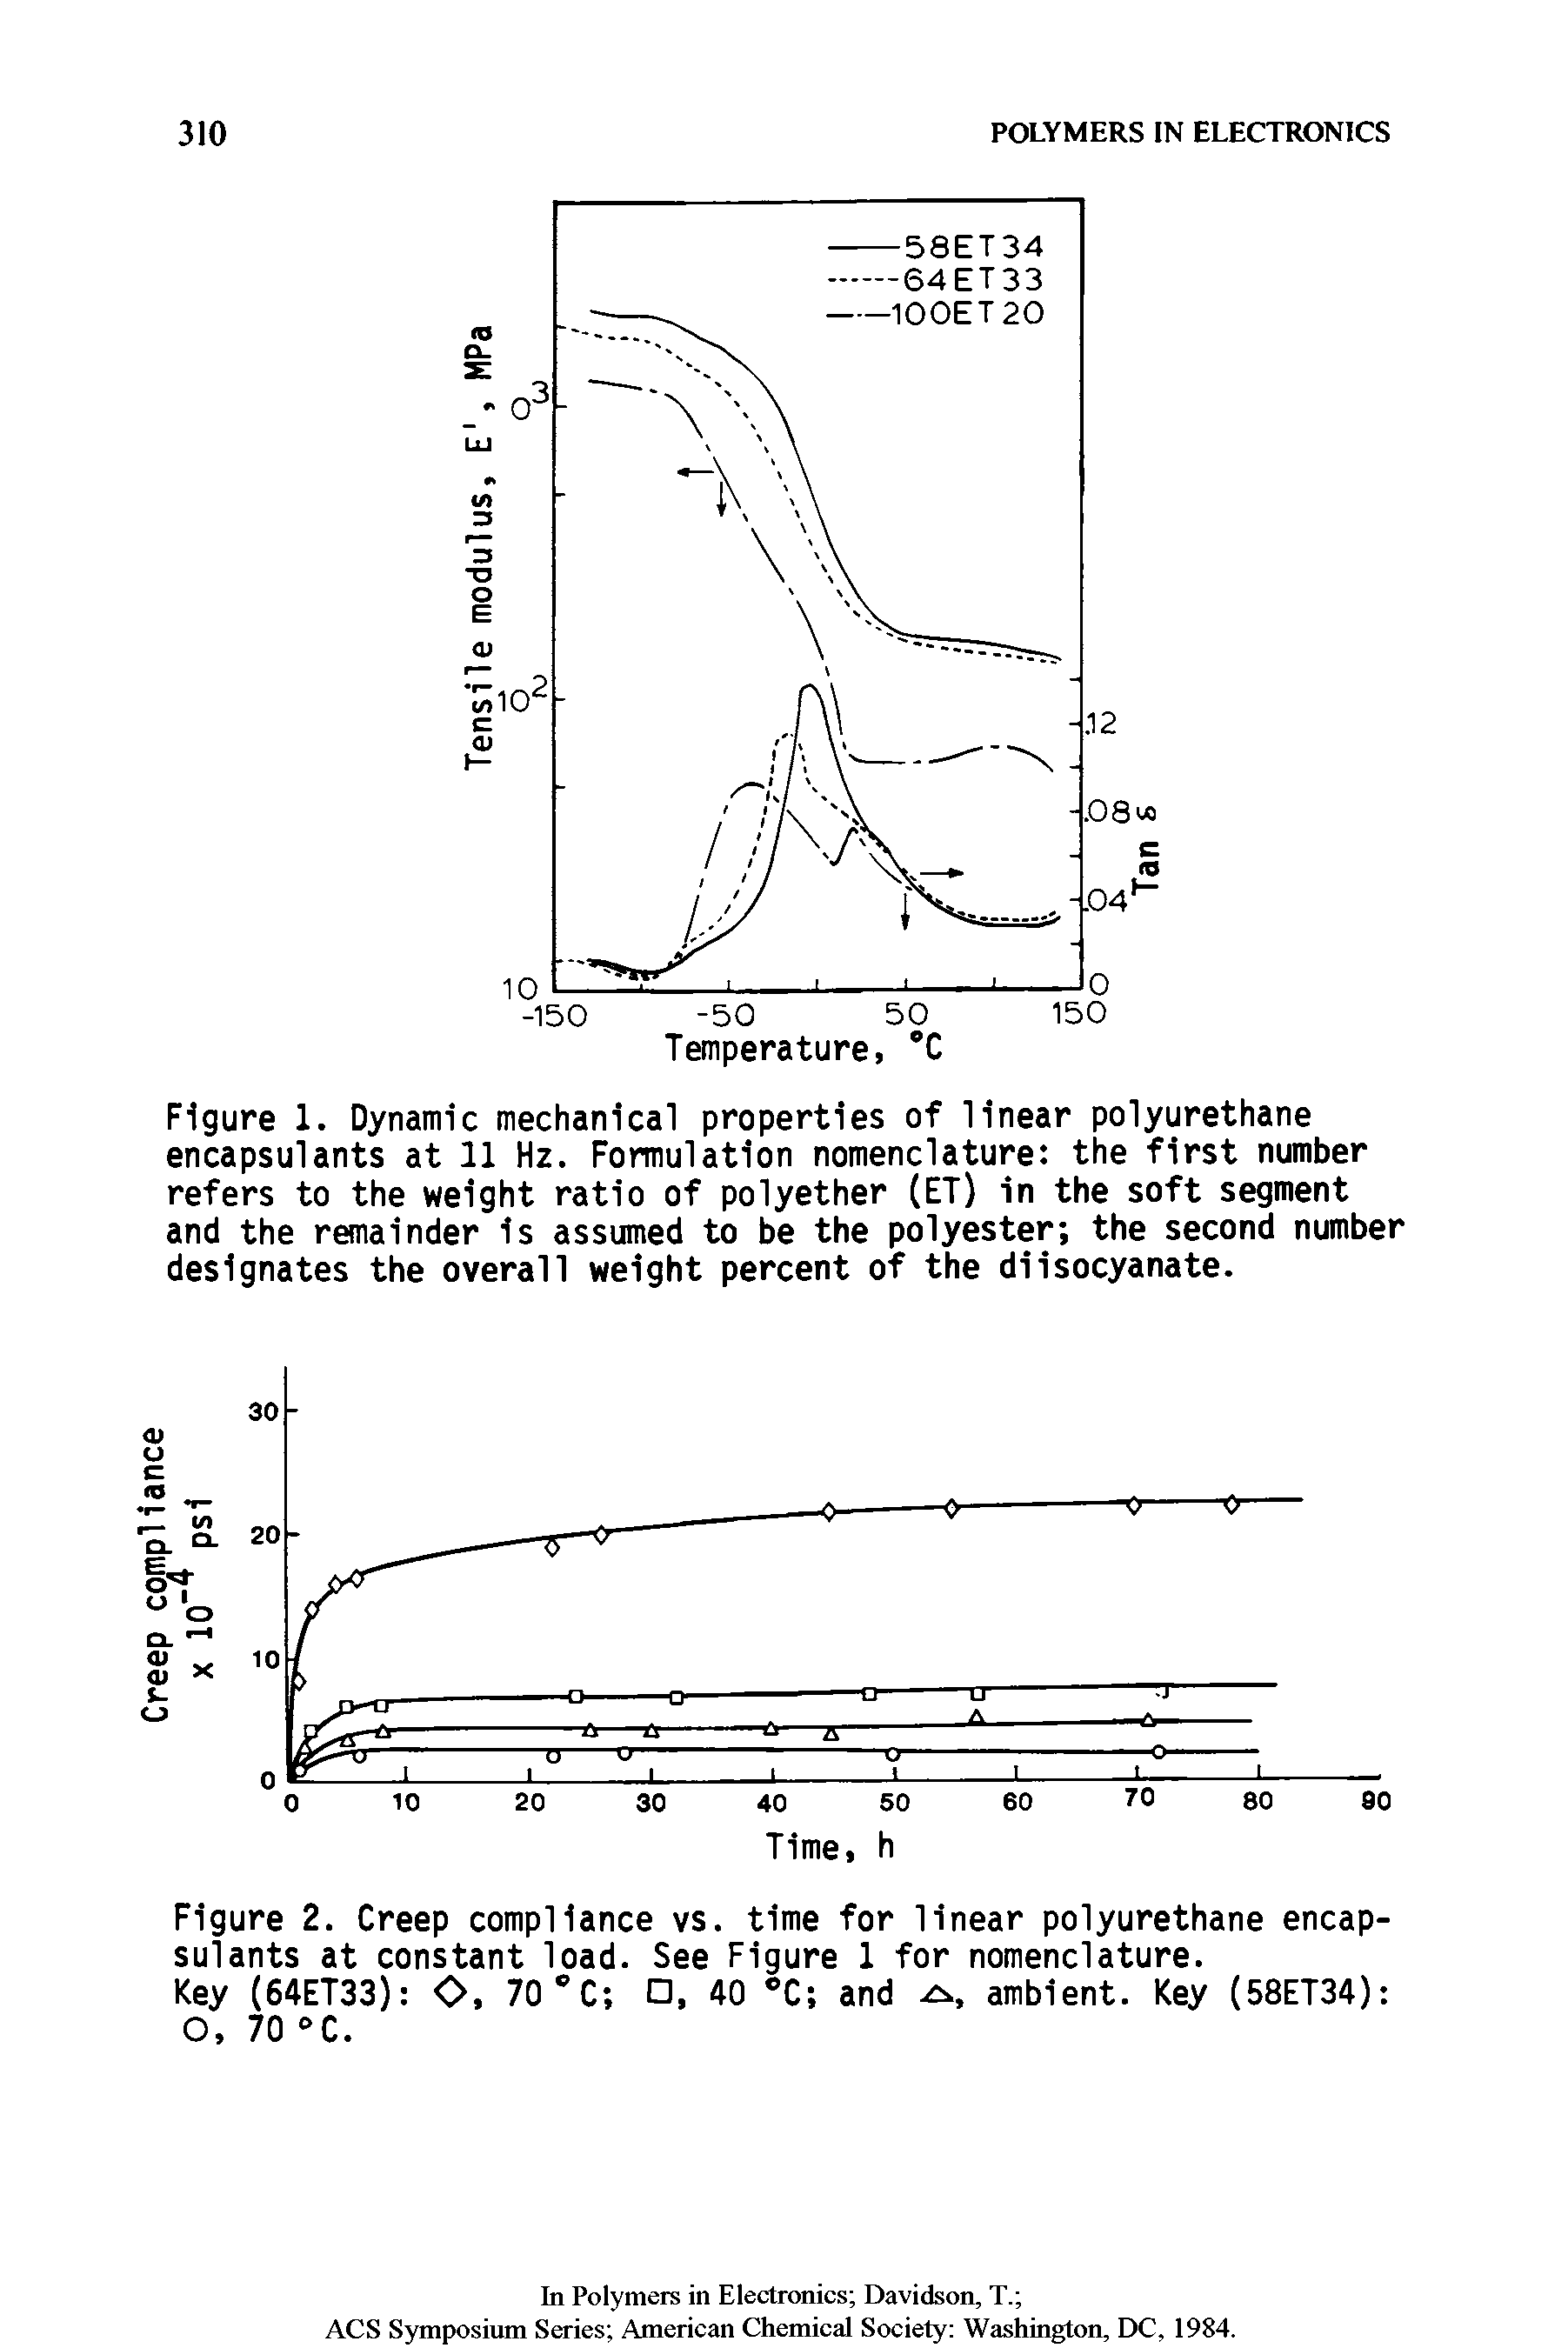 Figure 1. Dynamic mechanical properties of linear polyurethane encapsulants at 11 Hz. Formulation nomenclature the first number refers to the weight ratio of polyether (ET) in the soft segment and the remainder is assumed to be the polyester the second number designates the overall weight percent of the diisocyanate.